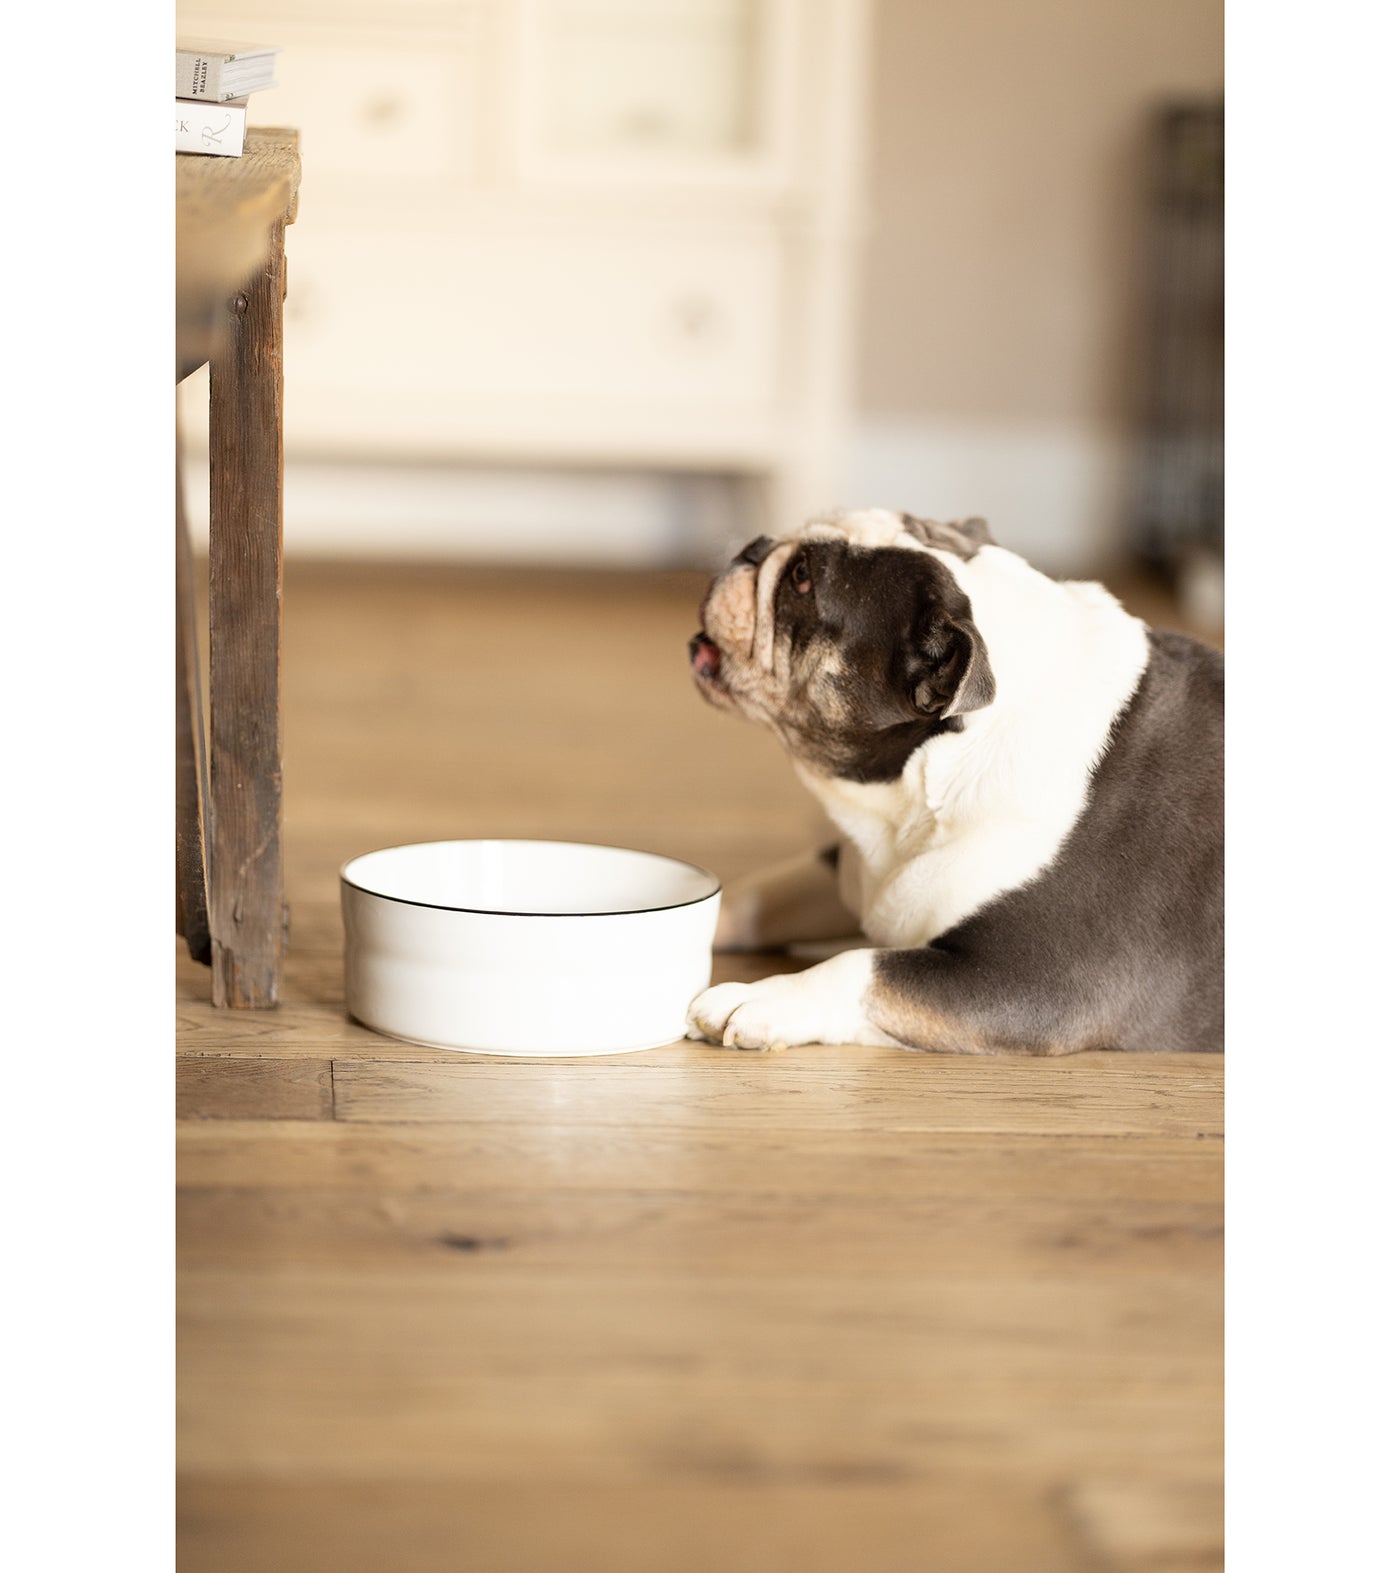 Farmhouse Black and White Stoneware Pet Bowl - Available in Large and Small